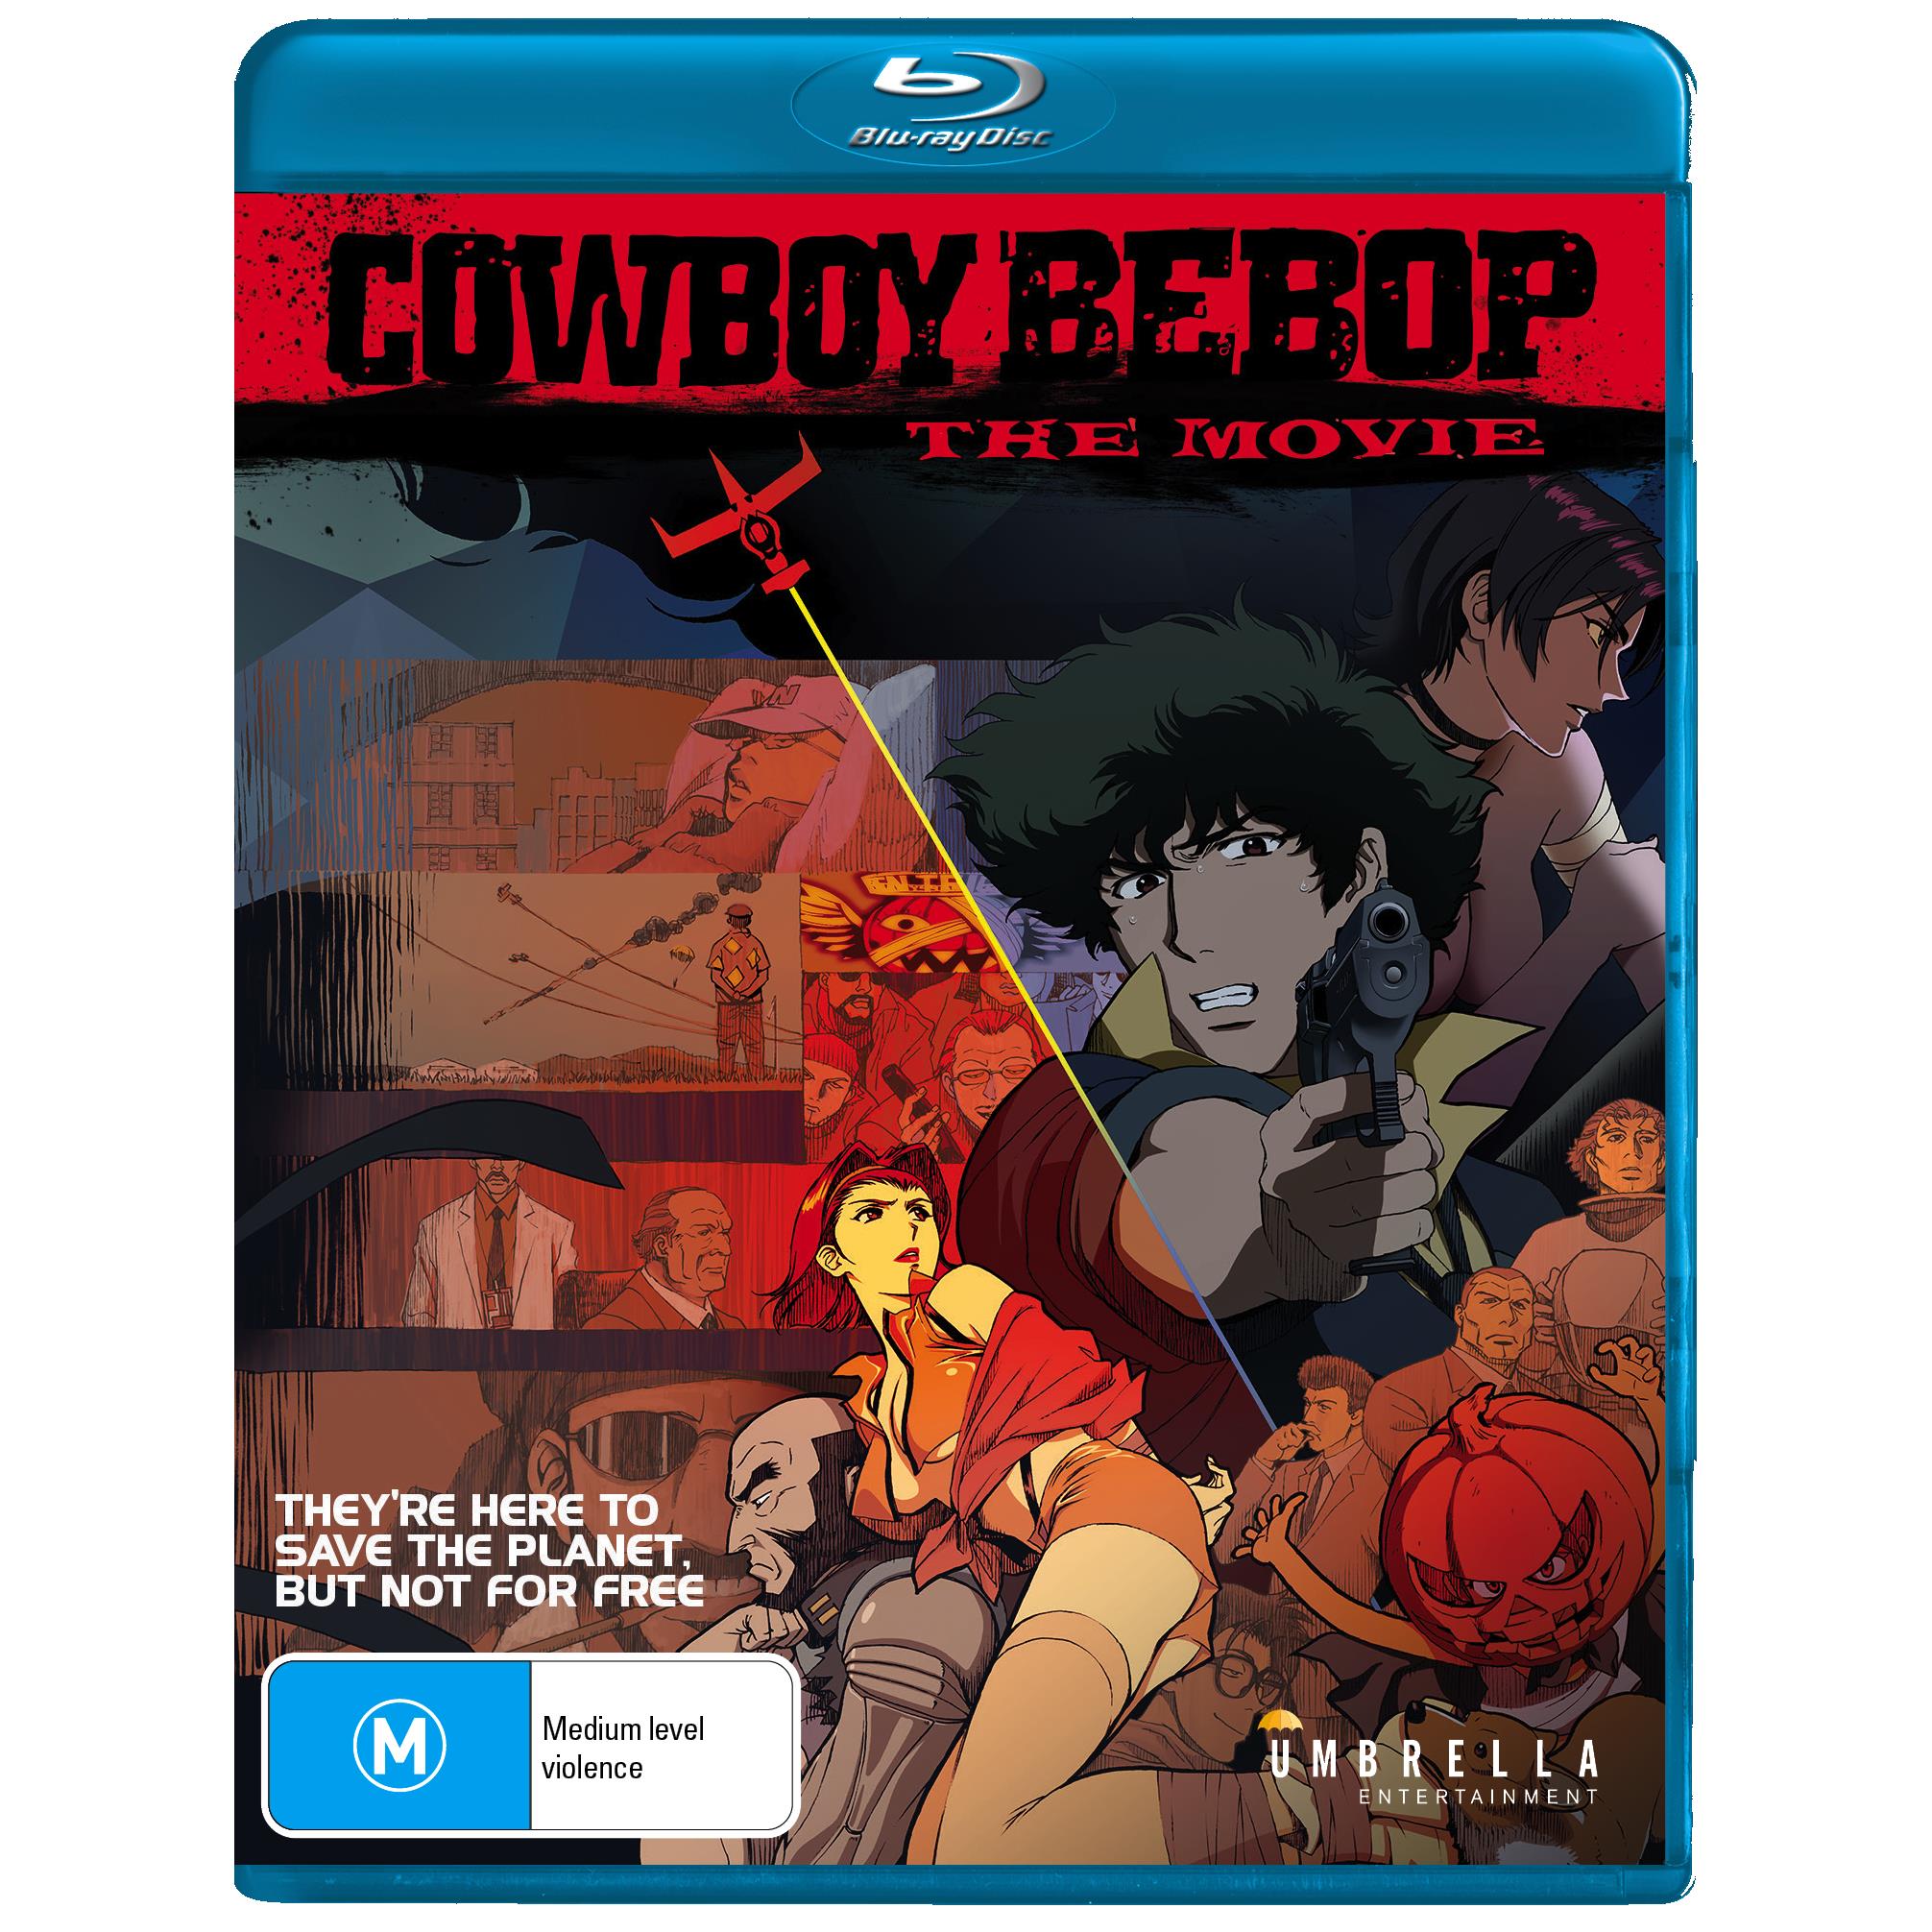 Cowboy Bebop Netflix Series Coming to Netflix in Fall 2021  Yoko Kanno  to Compose  Whats on Netflix